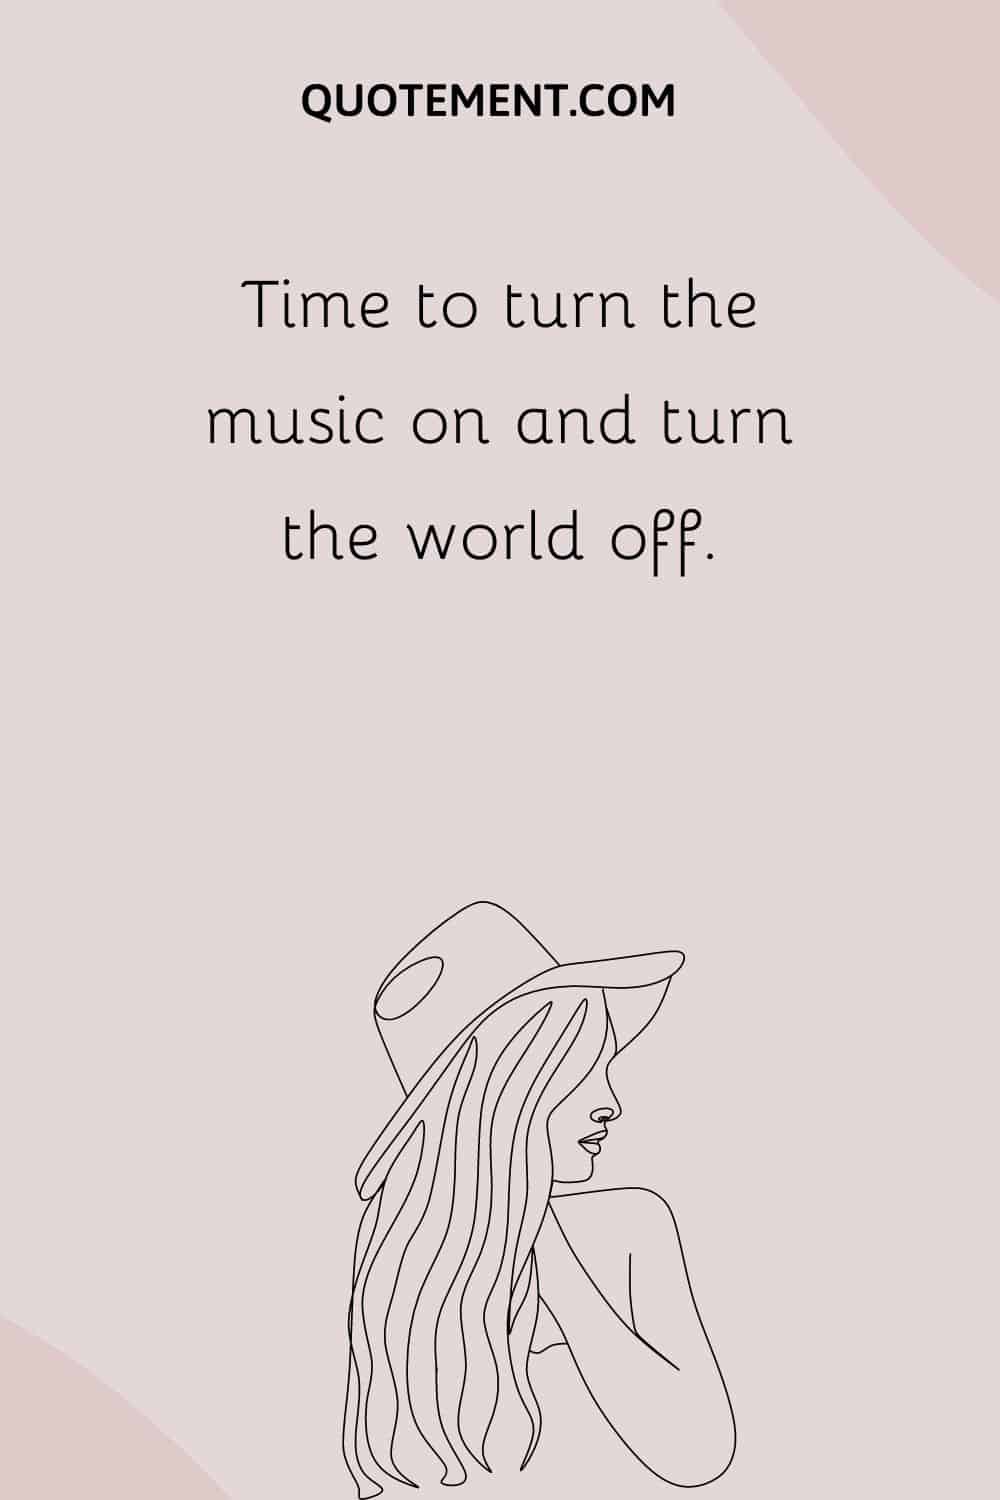 Time to turn the music on and turn the world off.